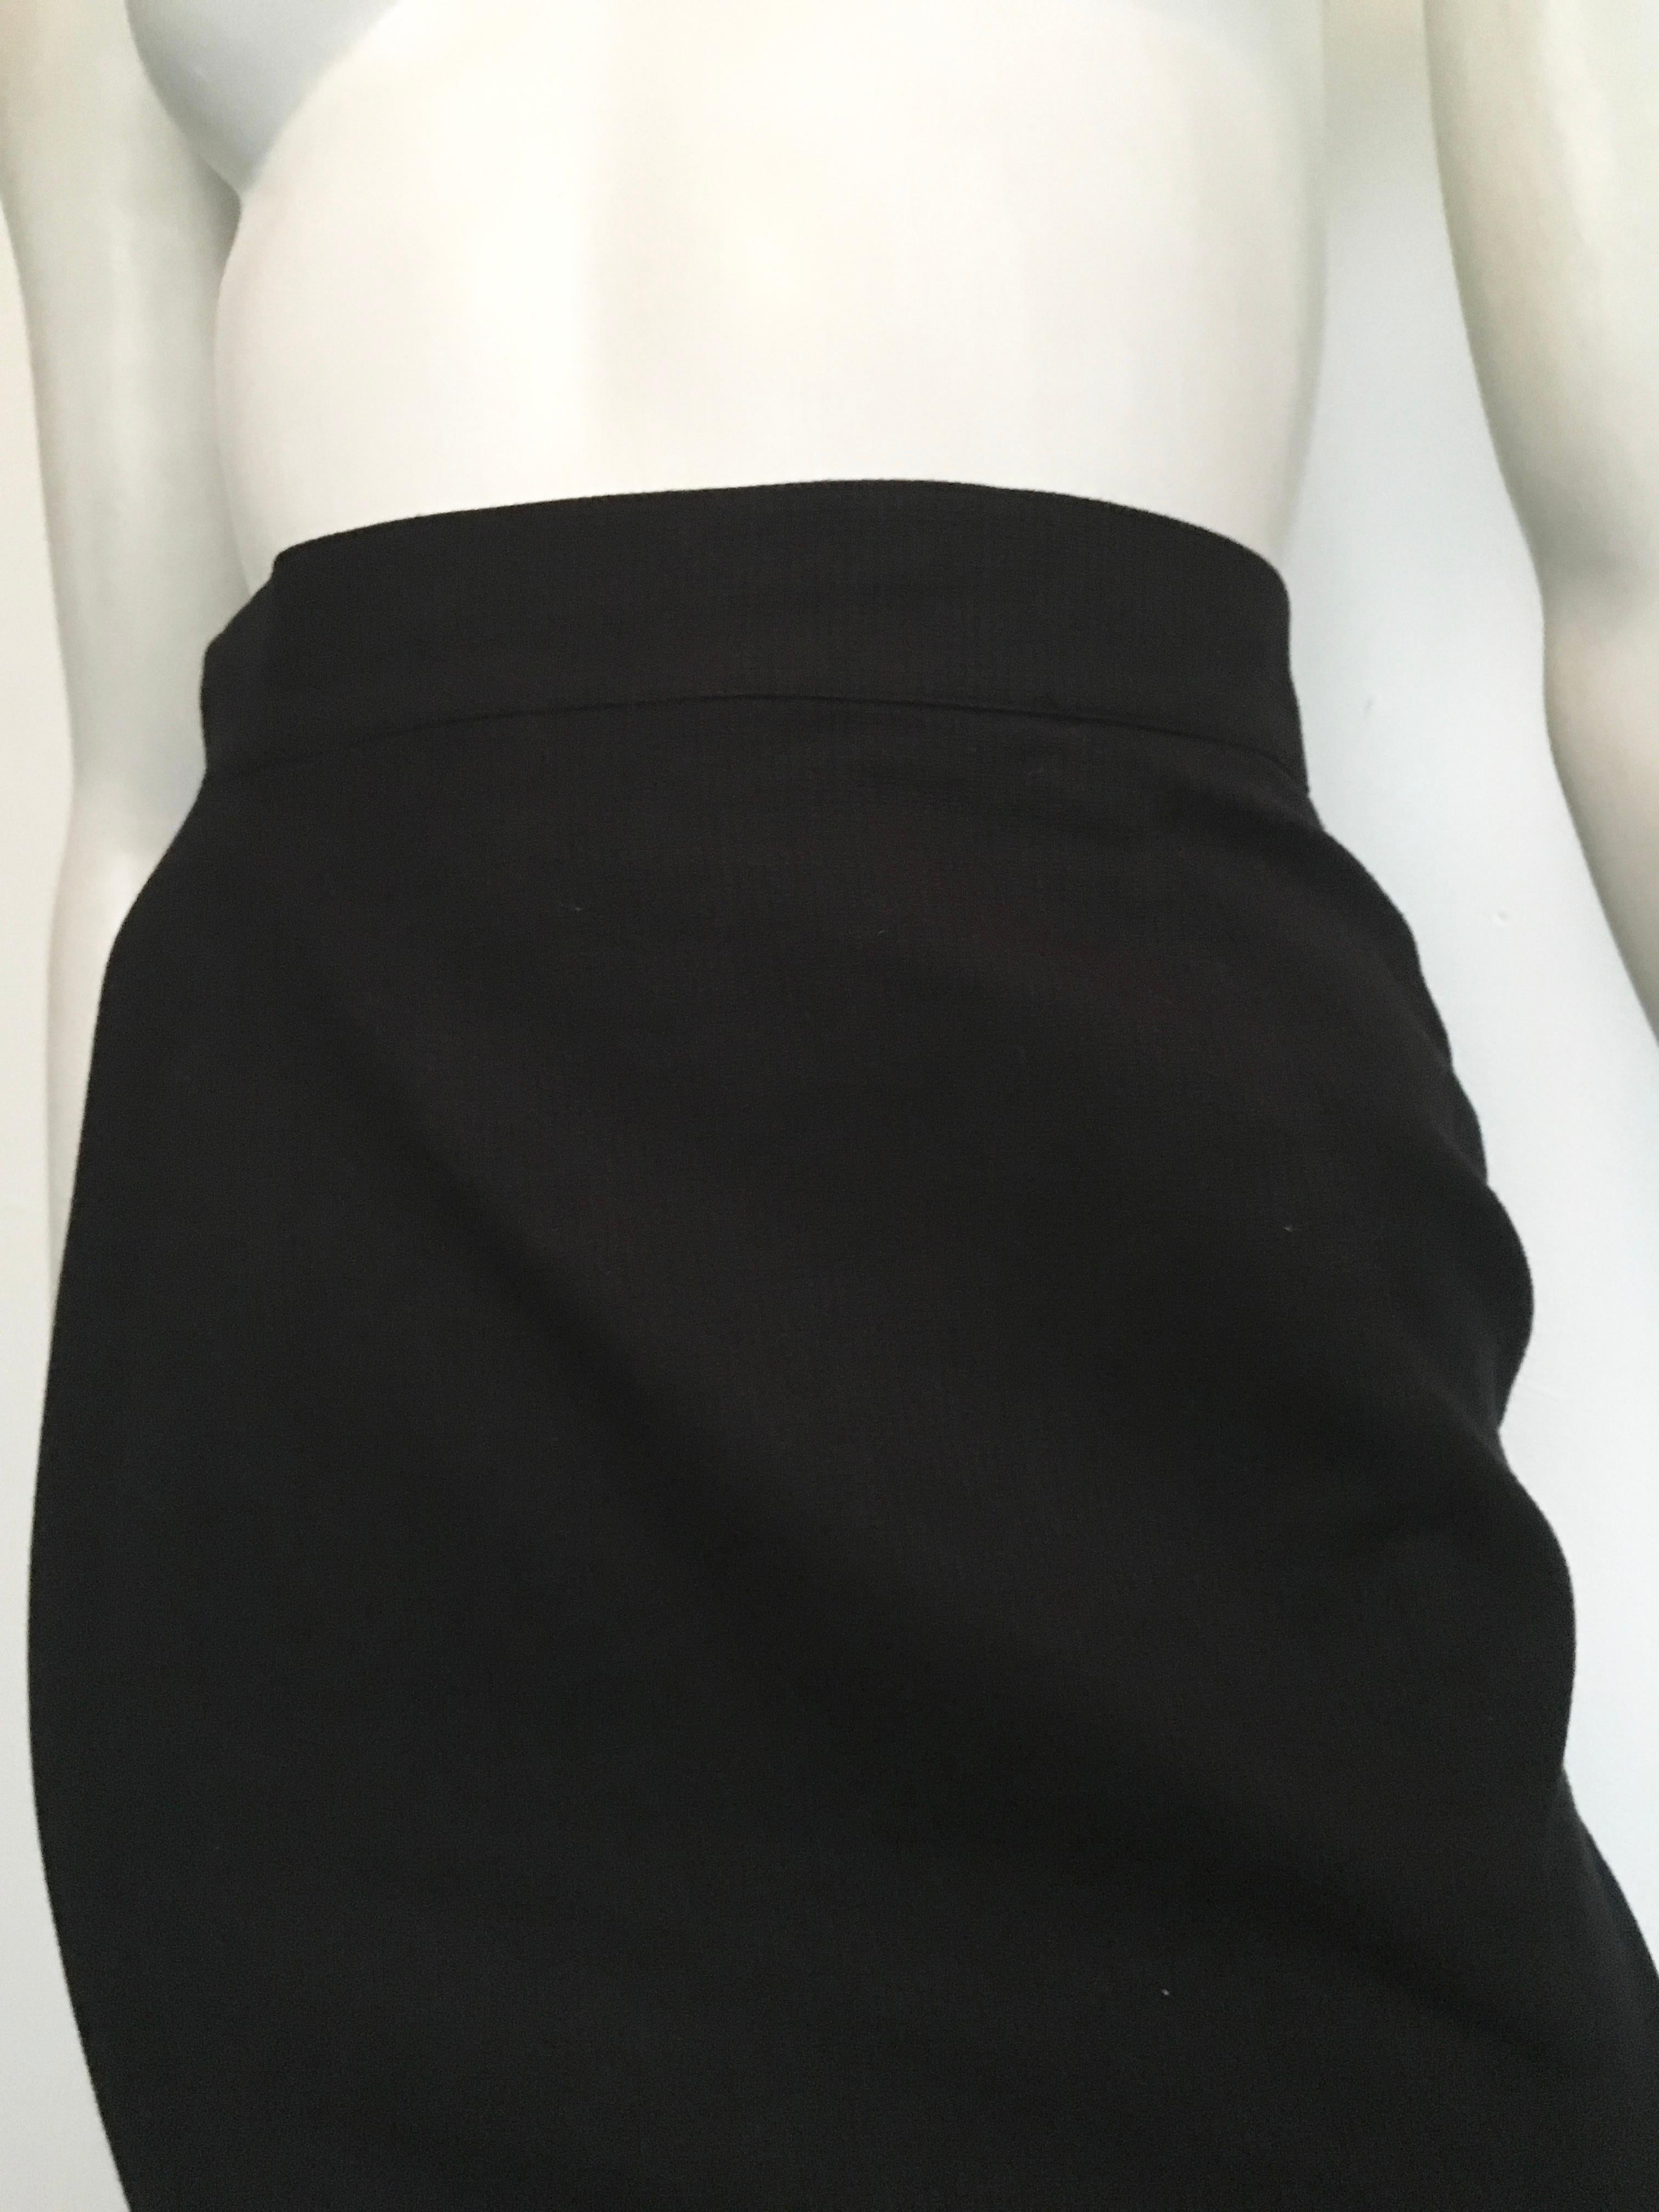 Thierry Mugler 1990s black cotton short skirt is size 2.  The waist on this skirt is 25. 3/4